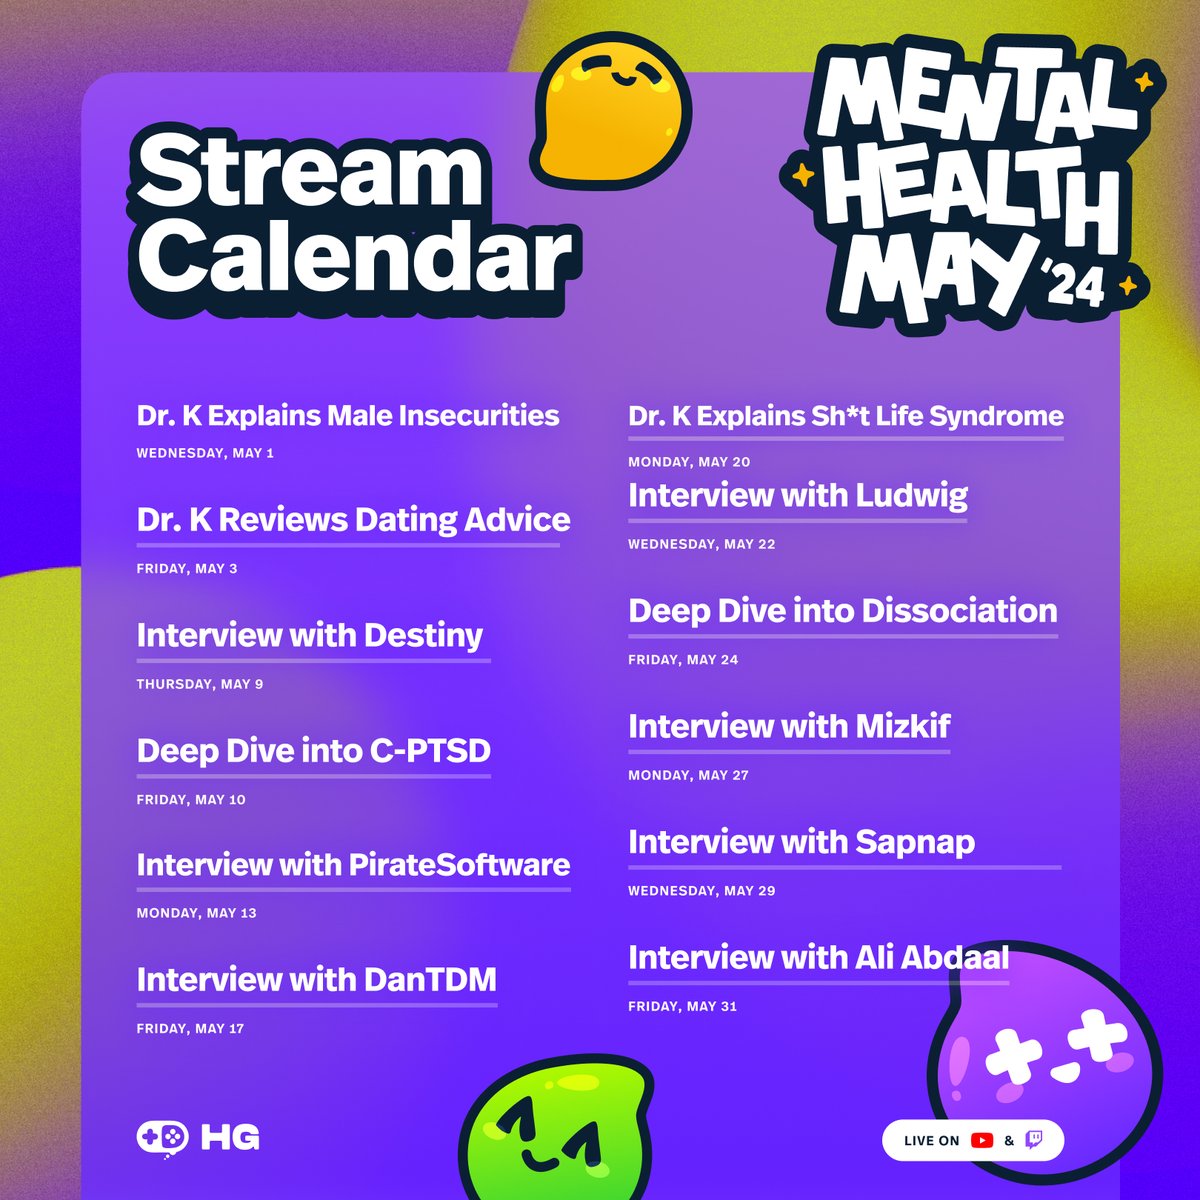 #MentalHealthMay2024 in full effect 💚 Get ready for an action packed month of deep dives, interviews, and community events!